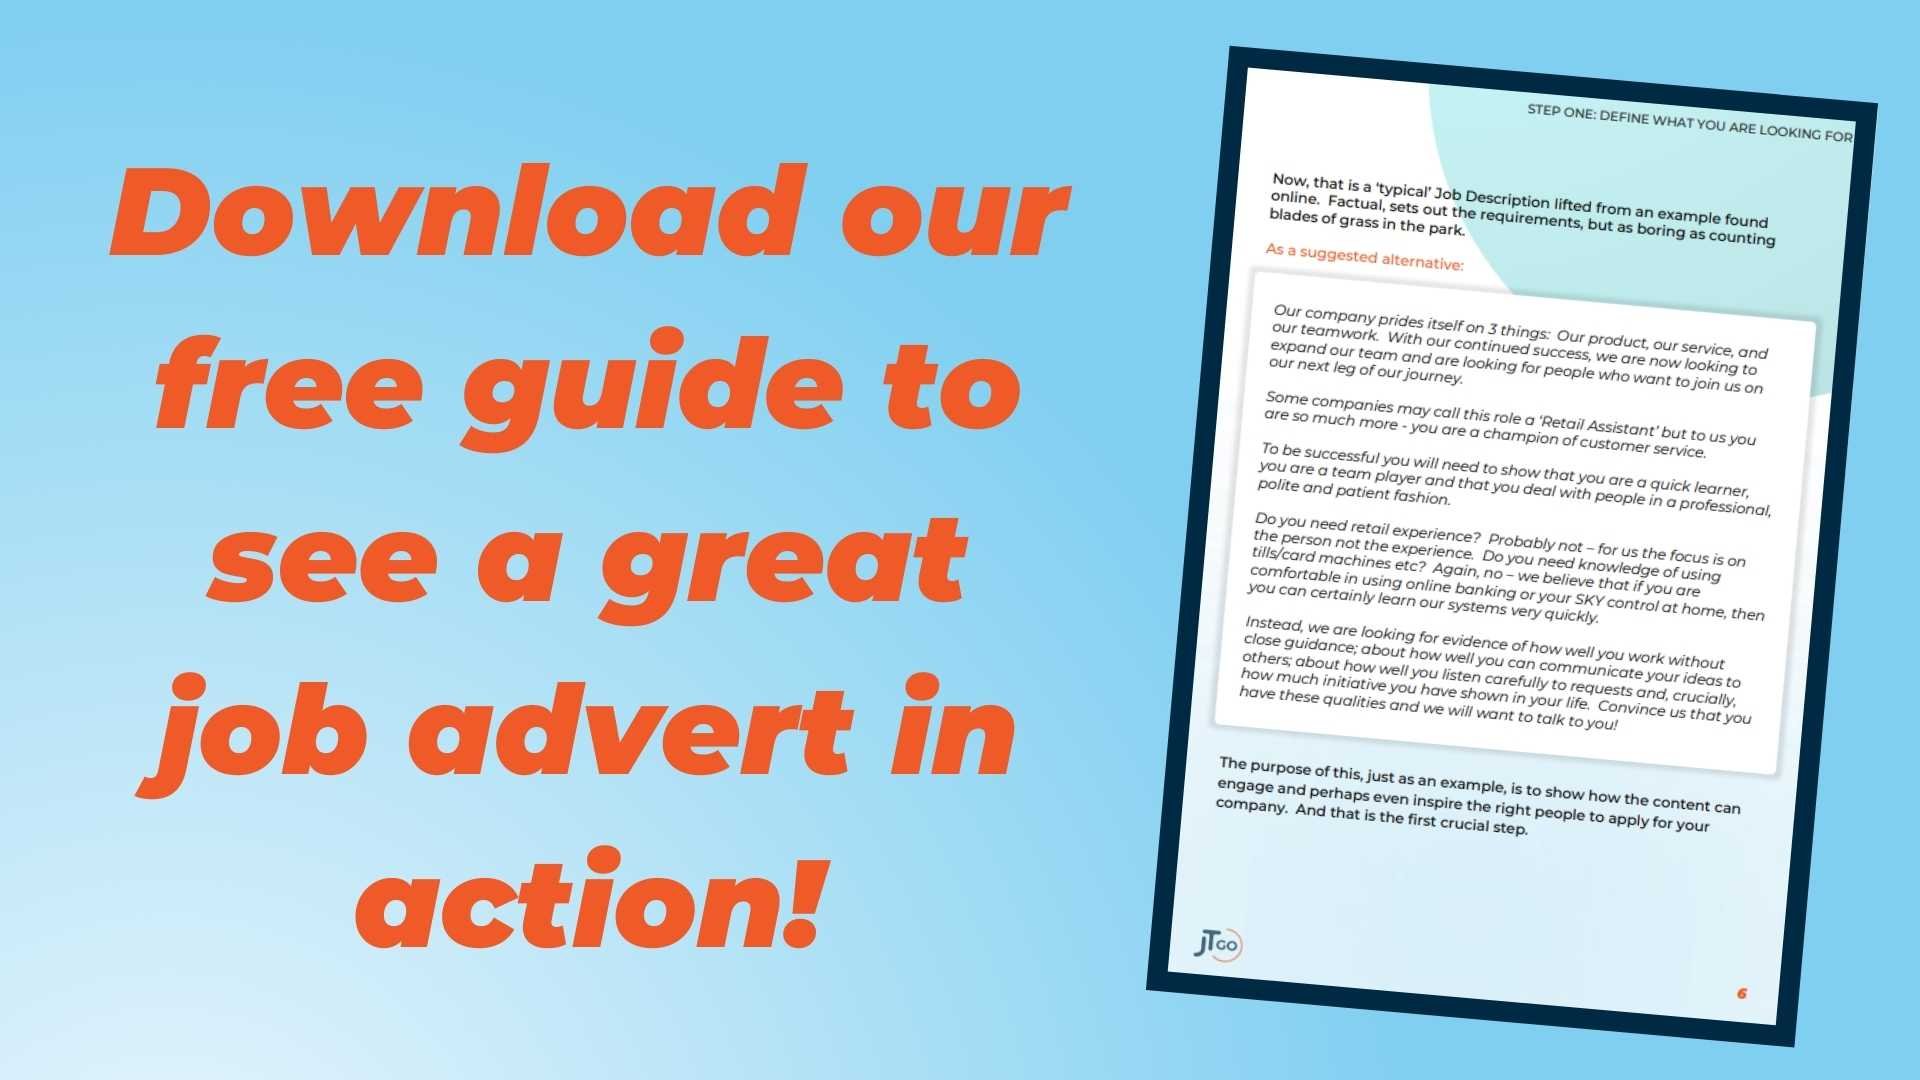 Download our free guide to see a great job advert in action!